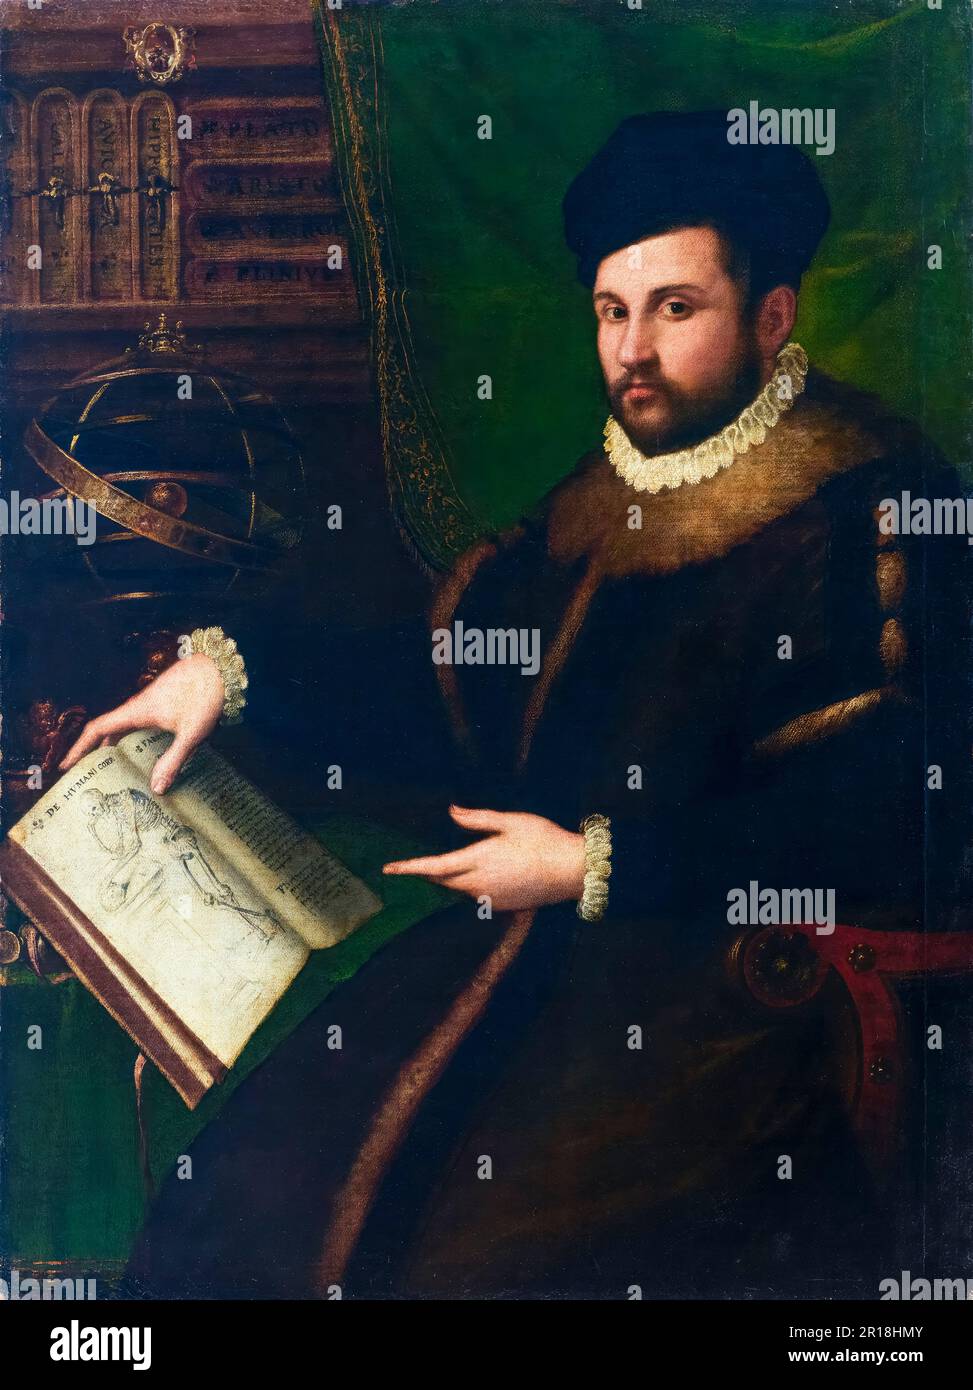 Girolamo Mercuriale (1530-1606), Italian Physician and Scholar, portrait painting in oil on canvas by Lavinia Fontana, 1588-1589 Stock Photo